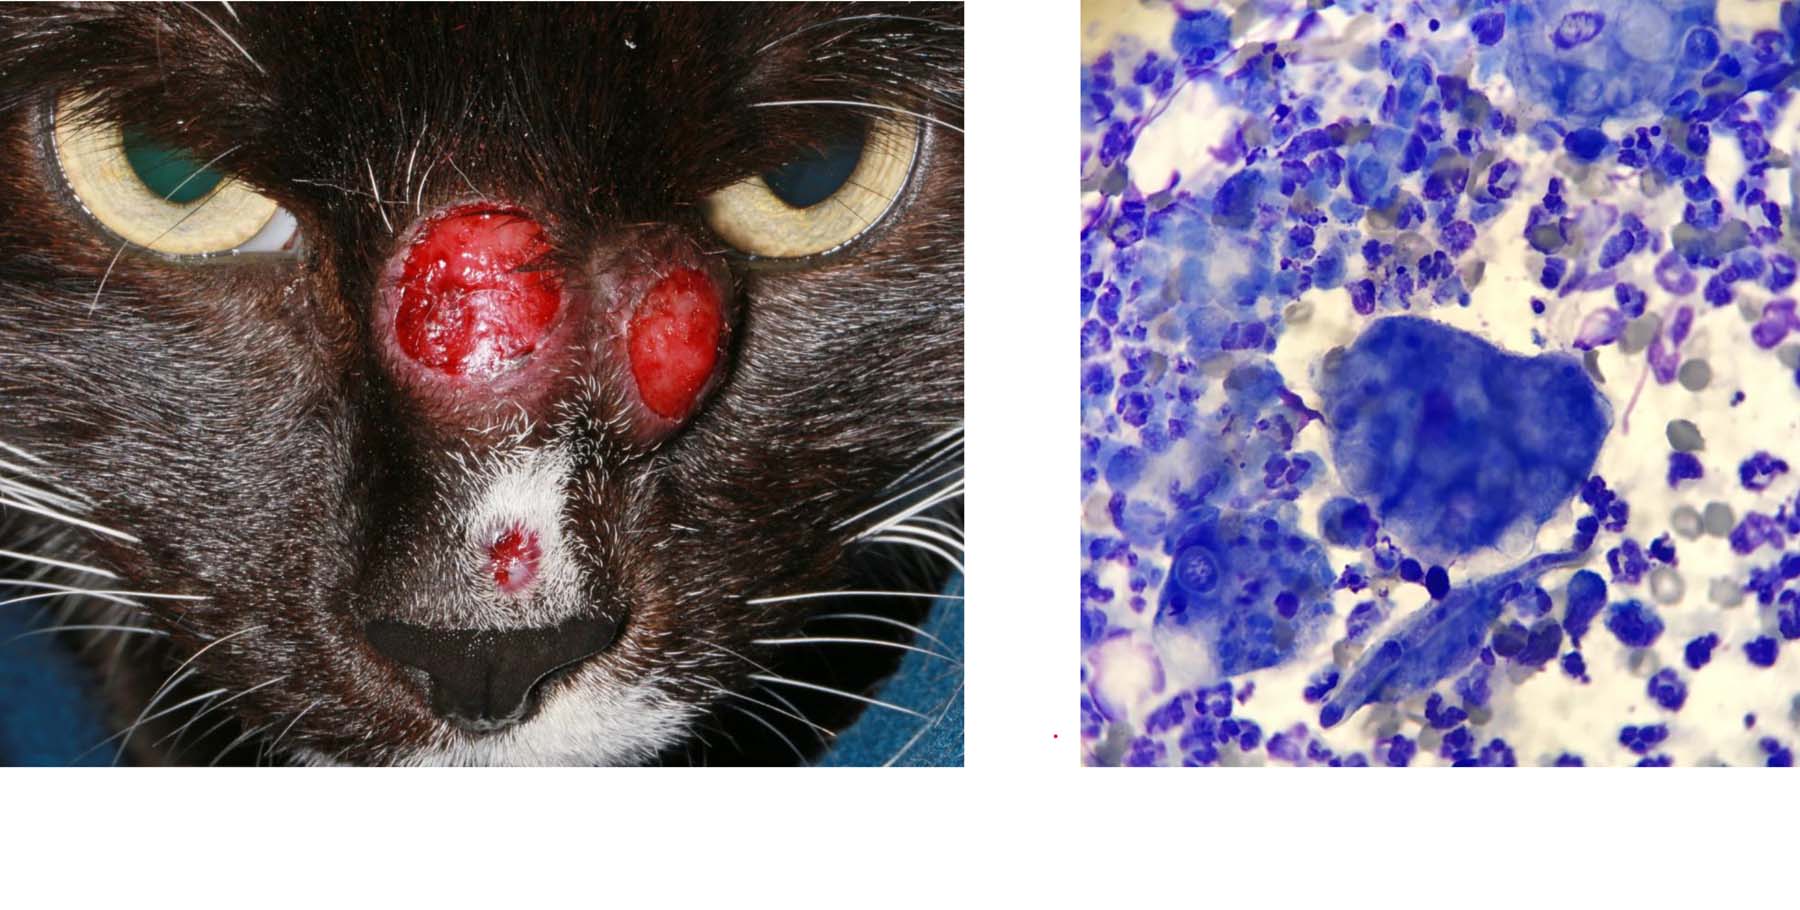 Phaeohyphomycosis: Multifocal, Chronic, Recurrent, Facial, Fungal Granuloma (Alternaria sp.), Fungal Elements on Immediate Cytology